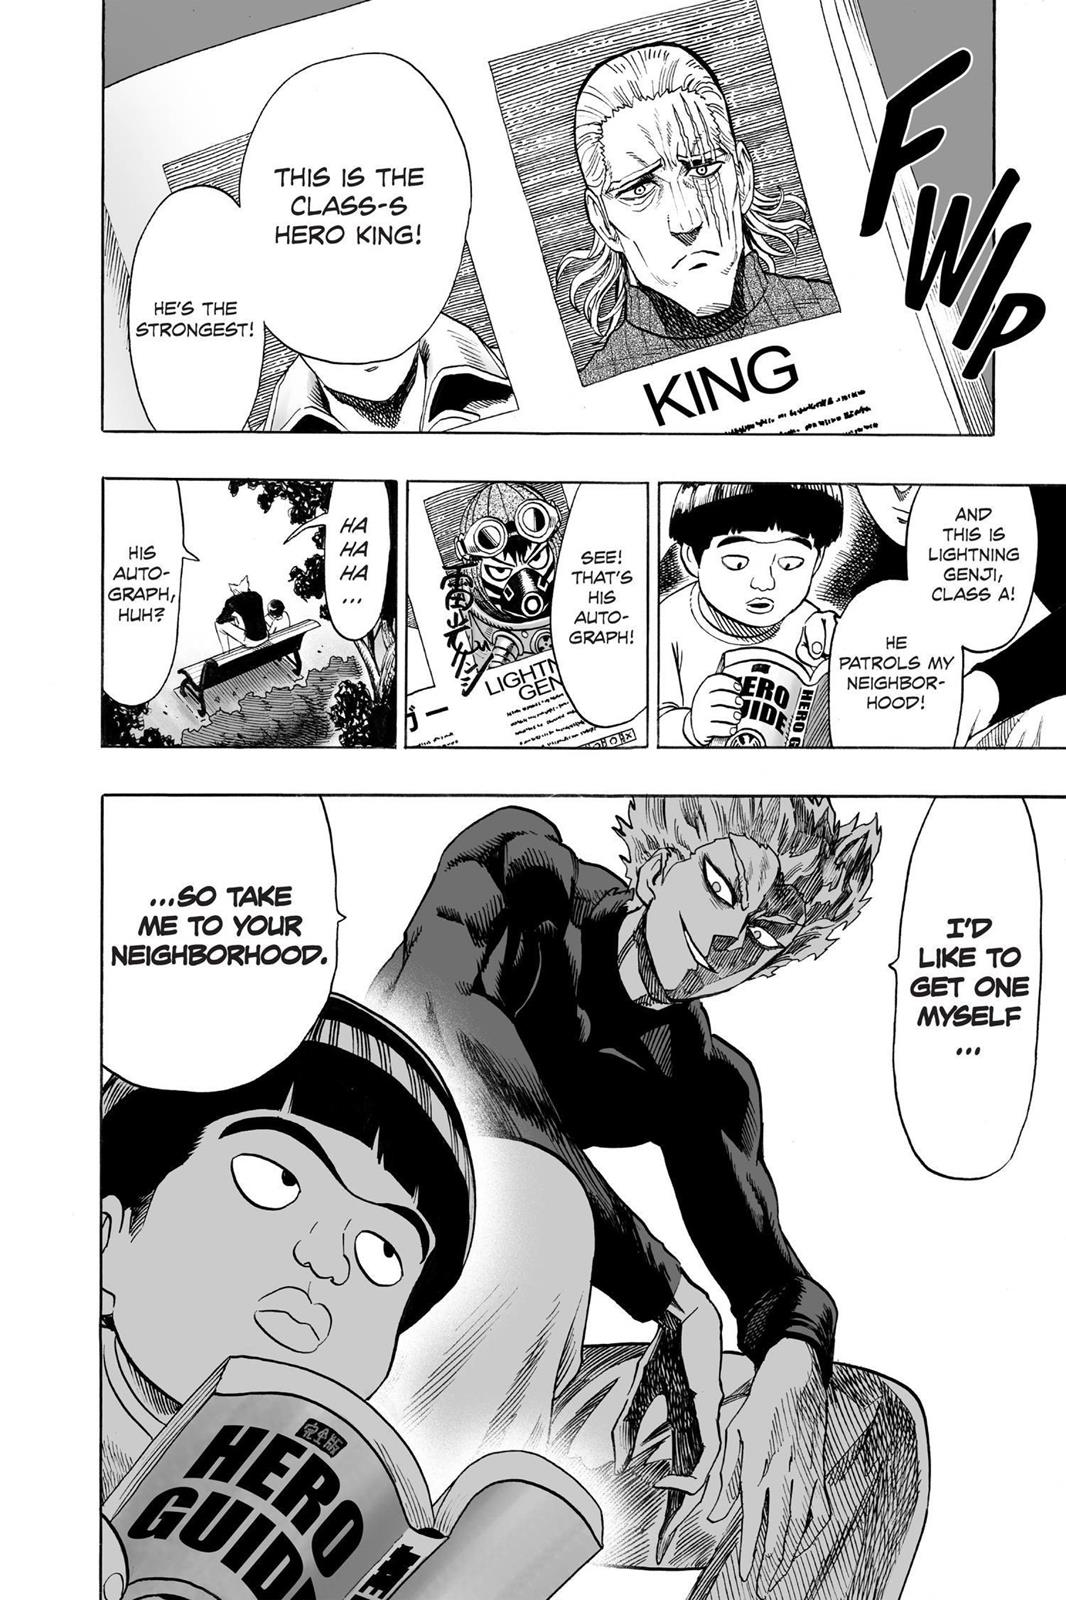 One-Punch Man, Punch 48 image 19